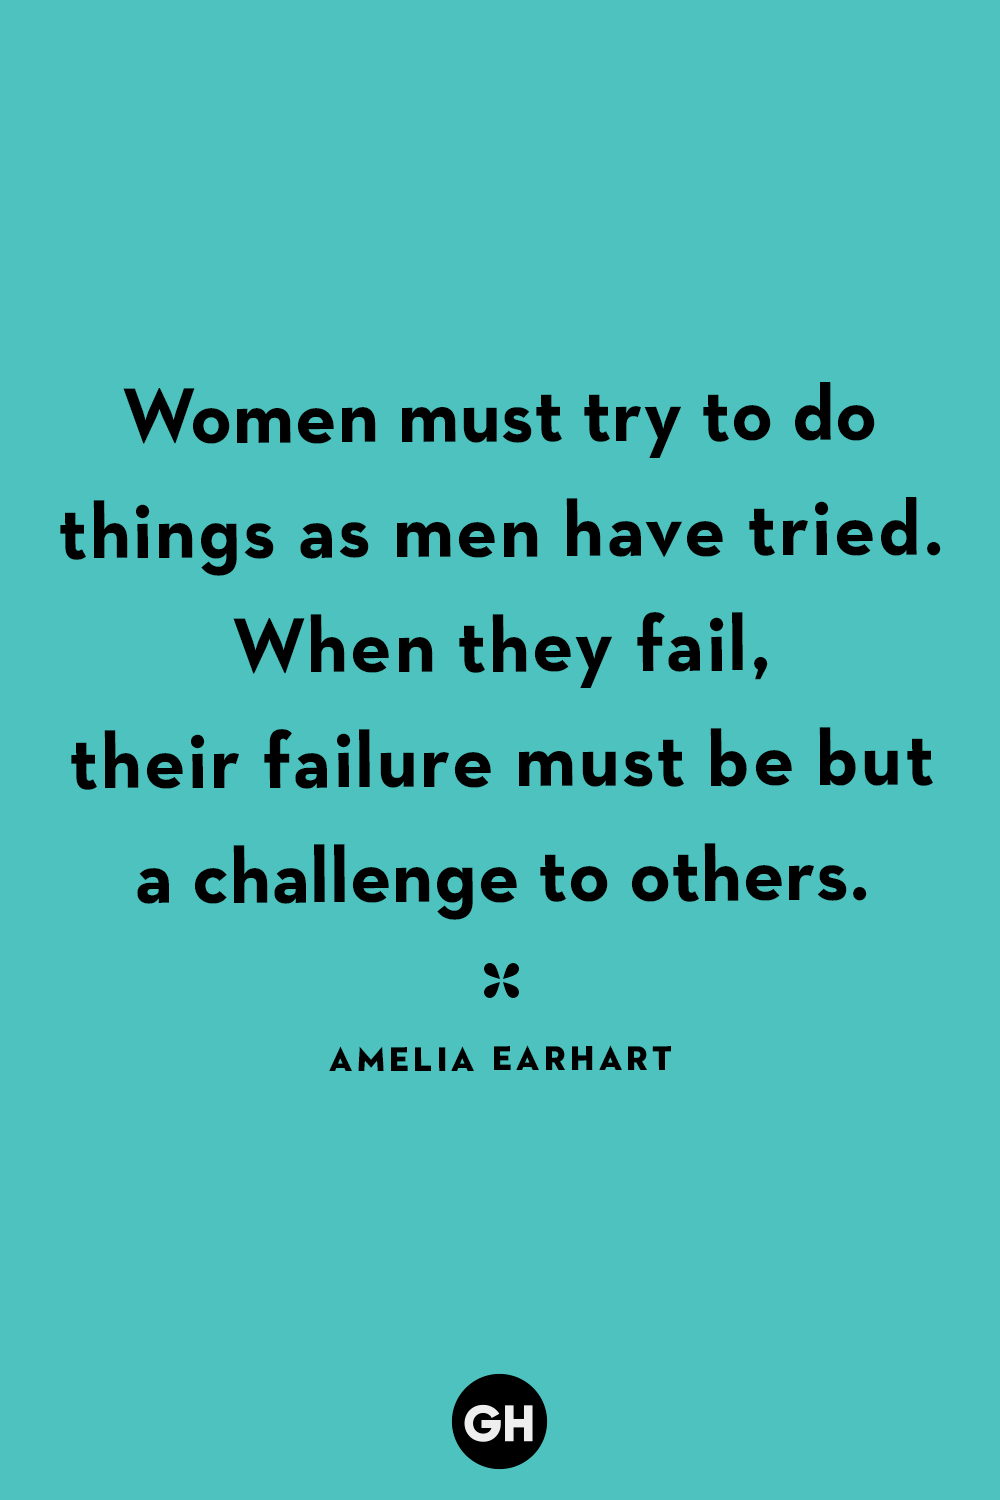 courage quotes for women